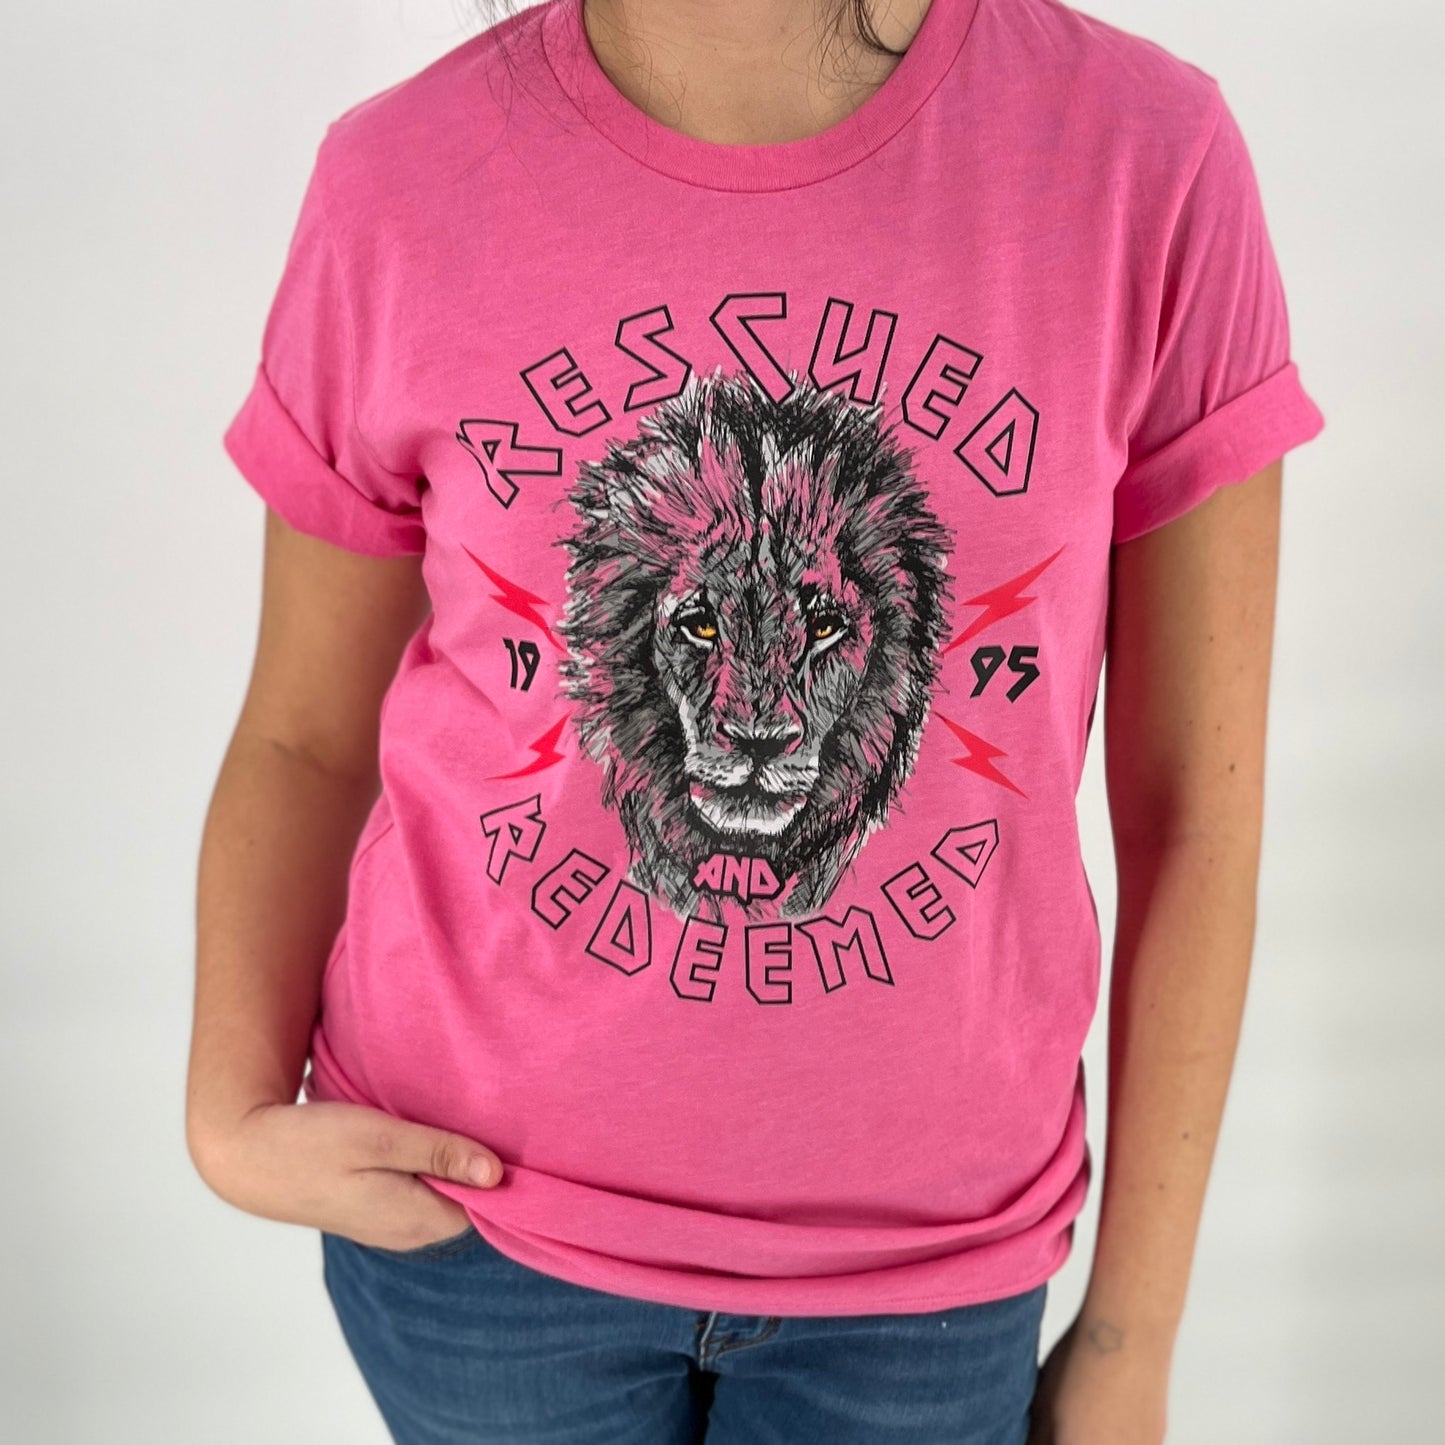 Rescued and Redeemed tee